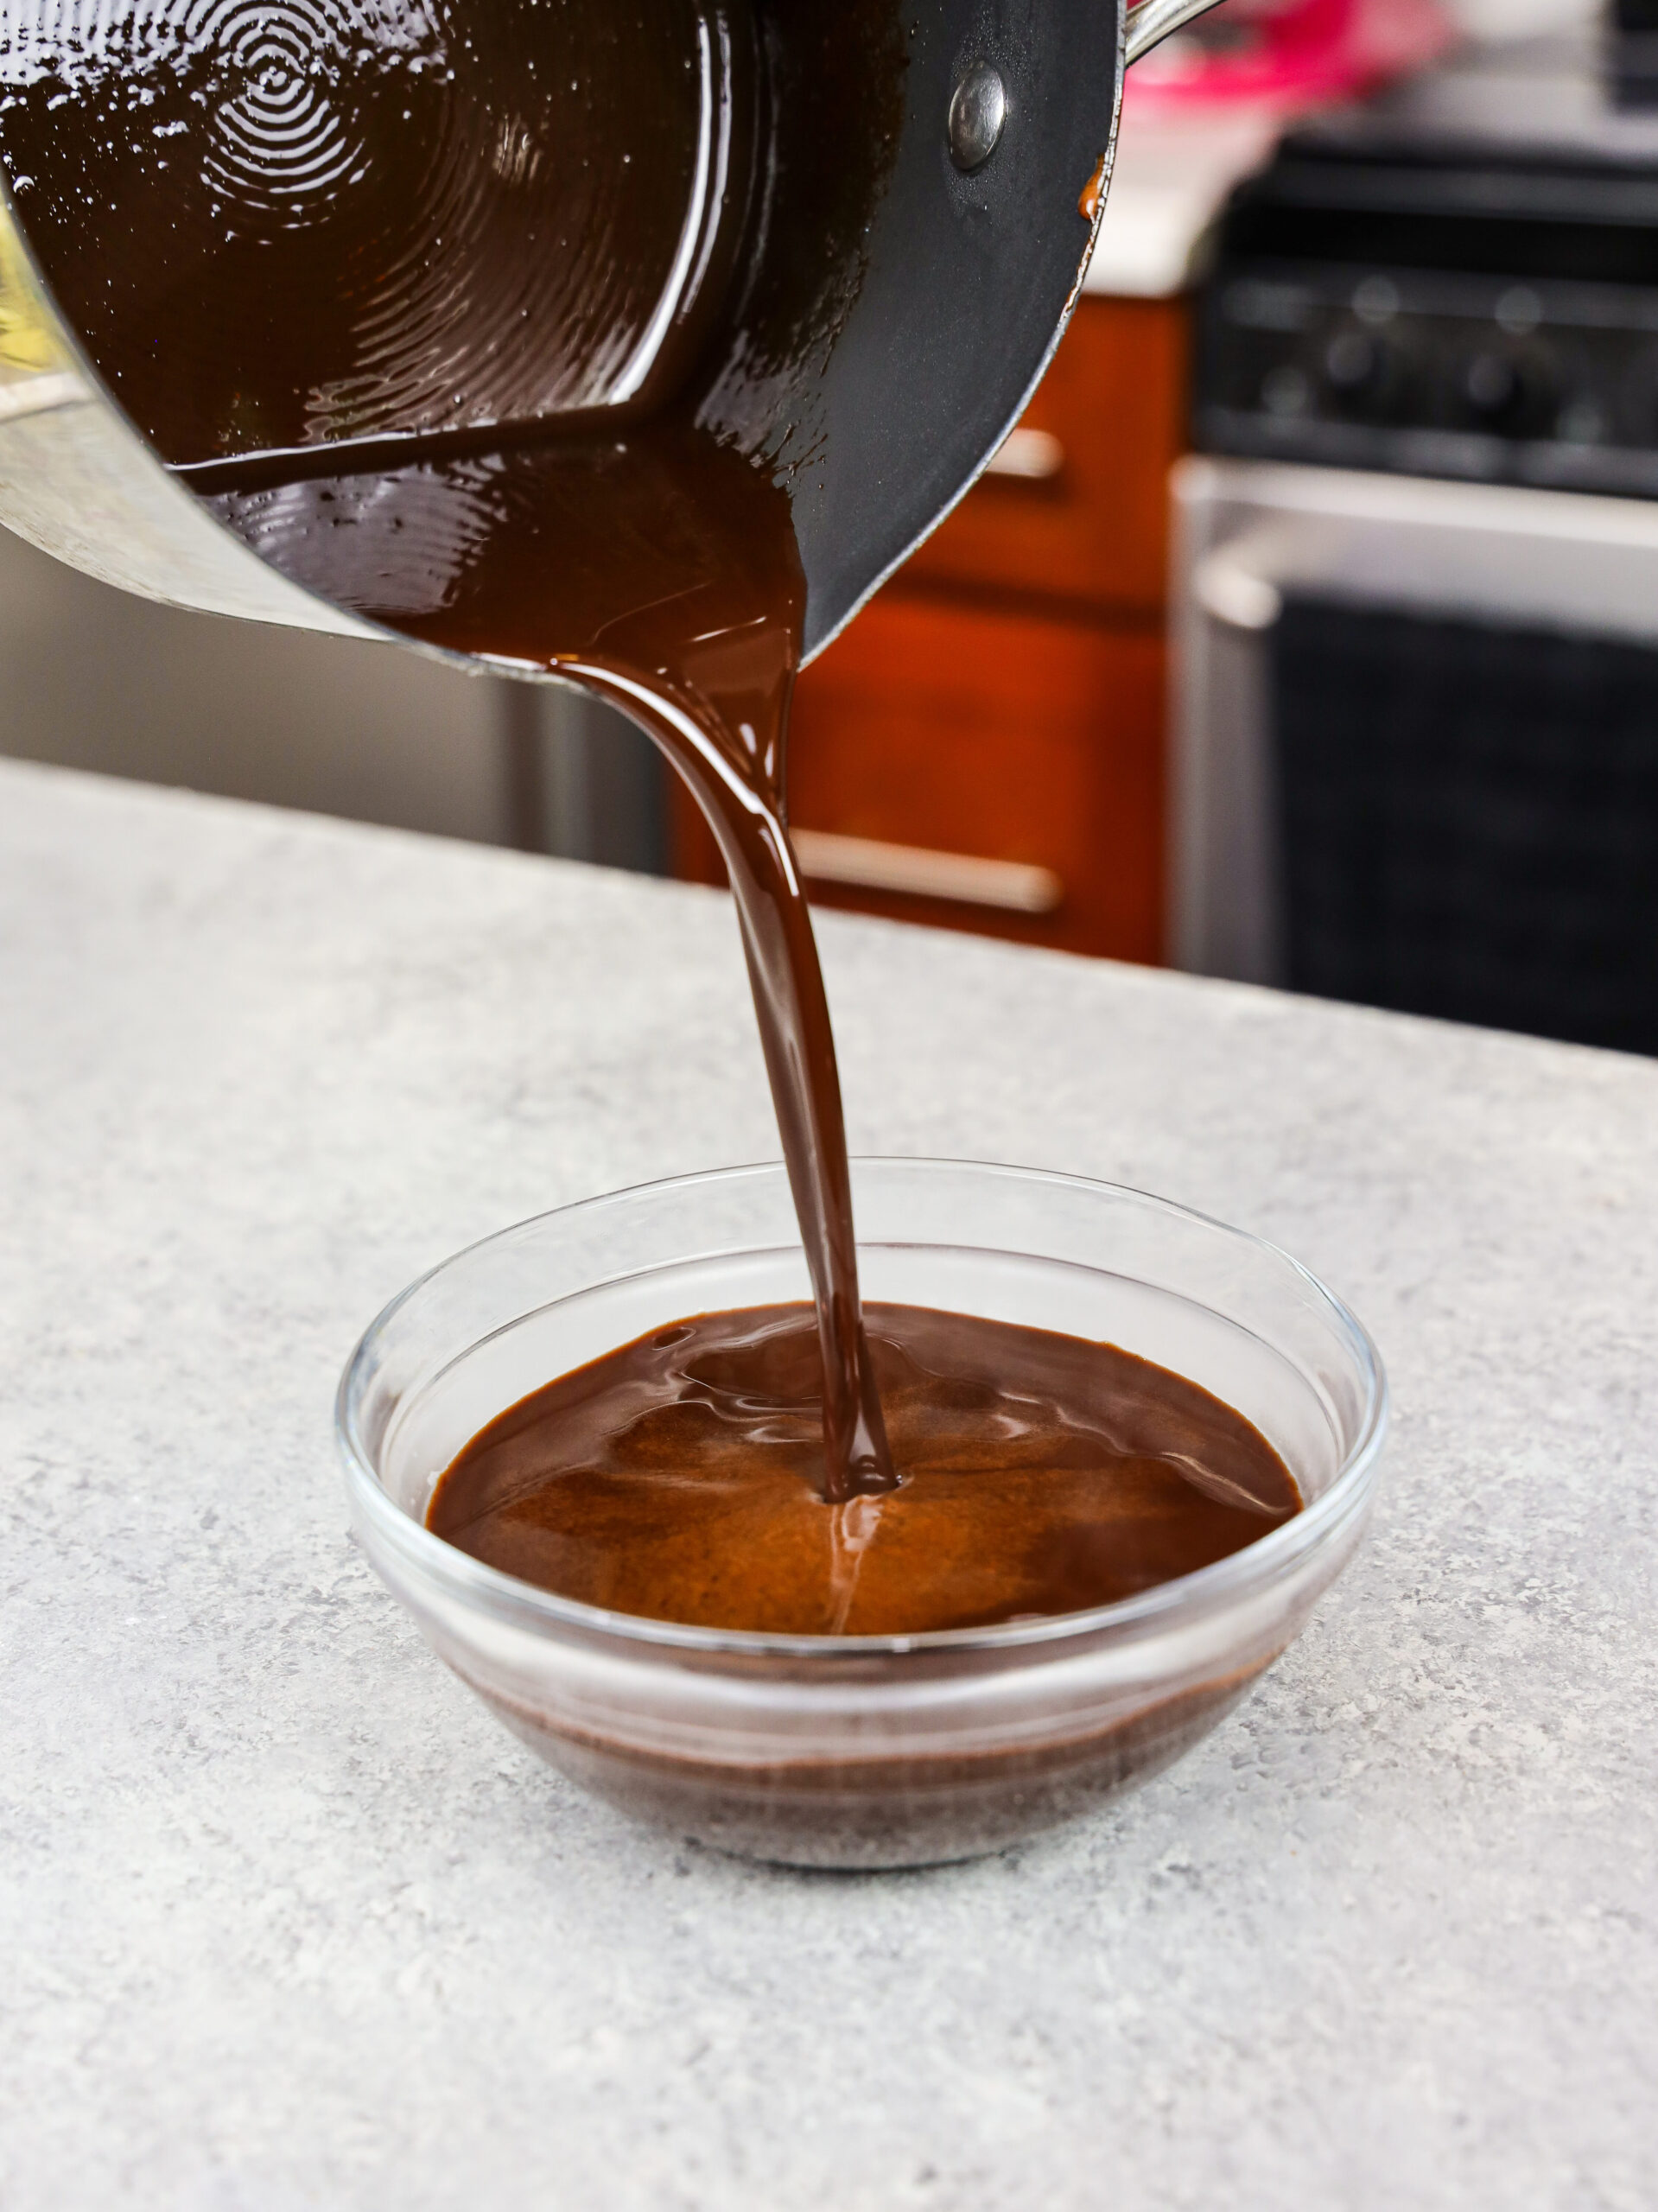 image of chocolate simple syrup being poured into a small bowl to cool